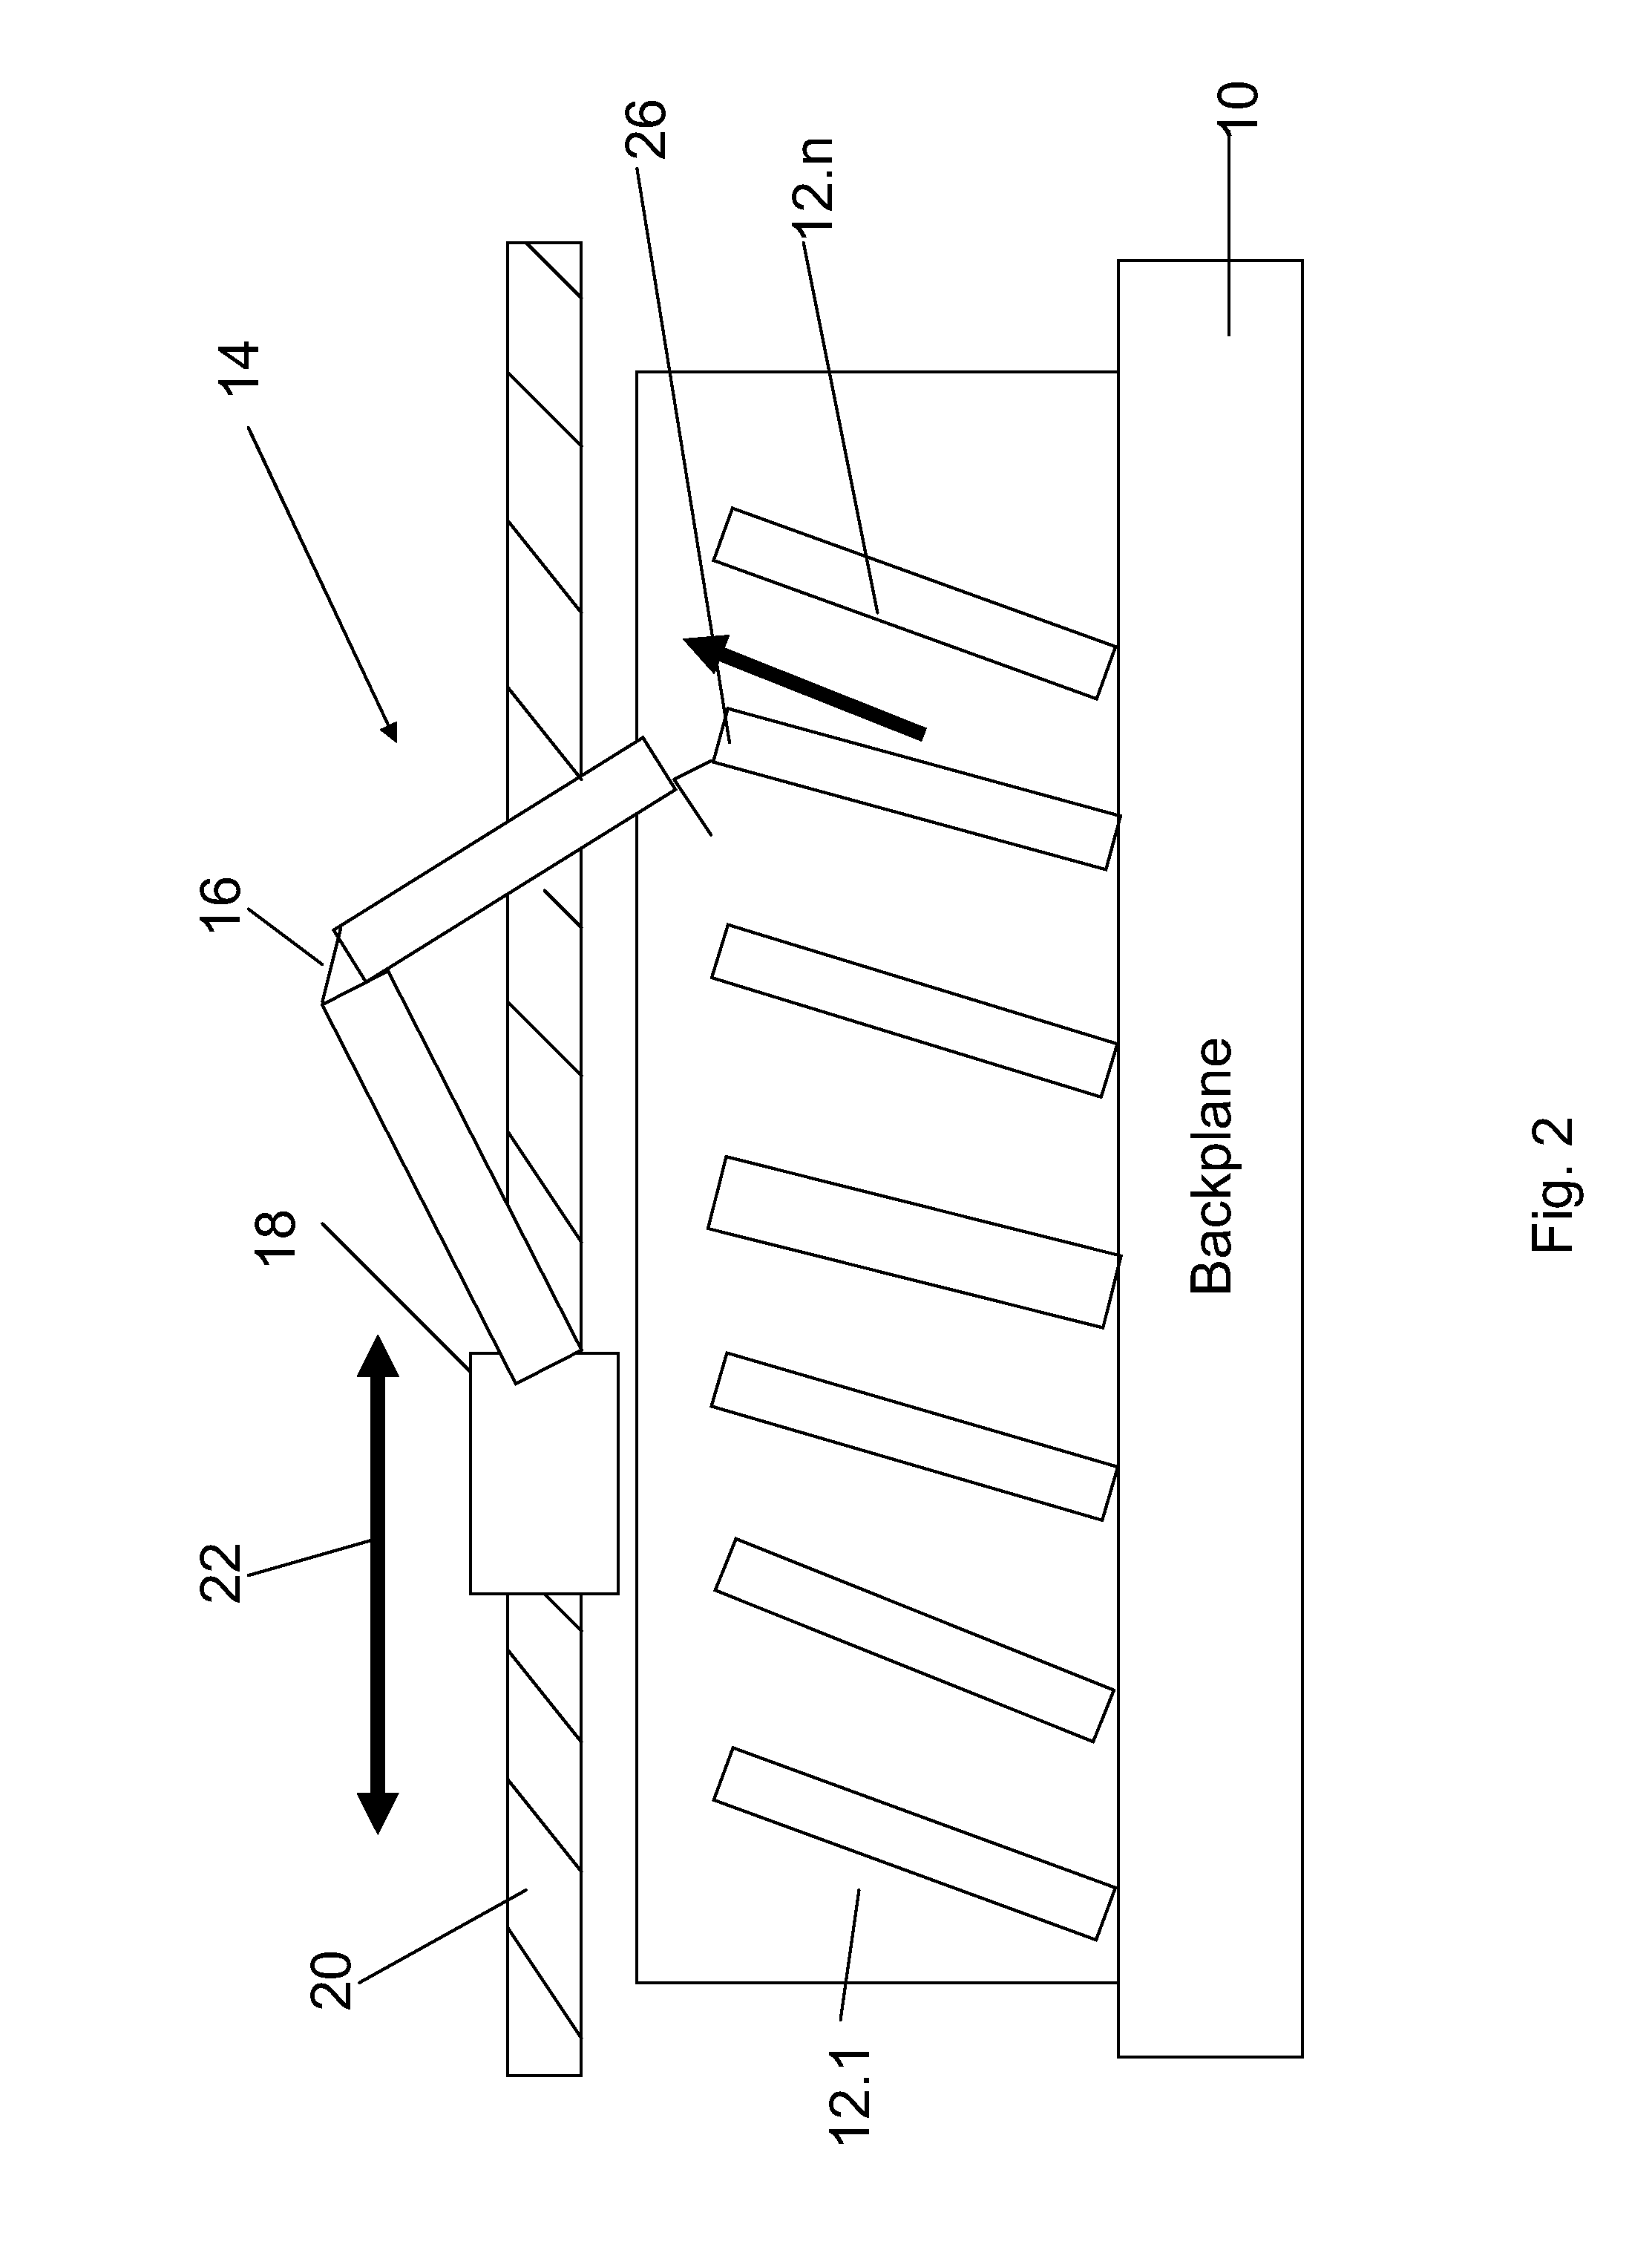 Card-based mounting assembly and maintenance system